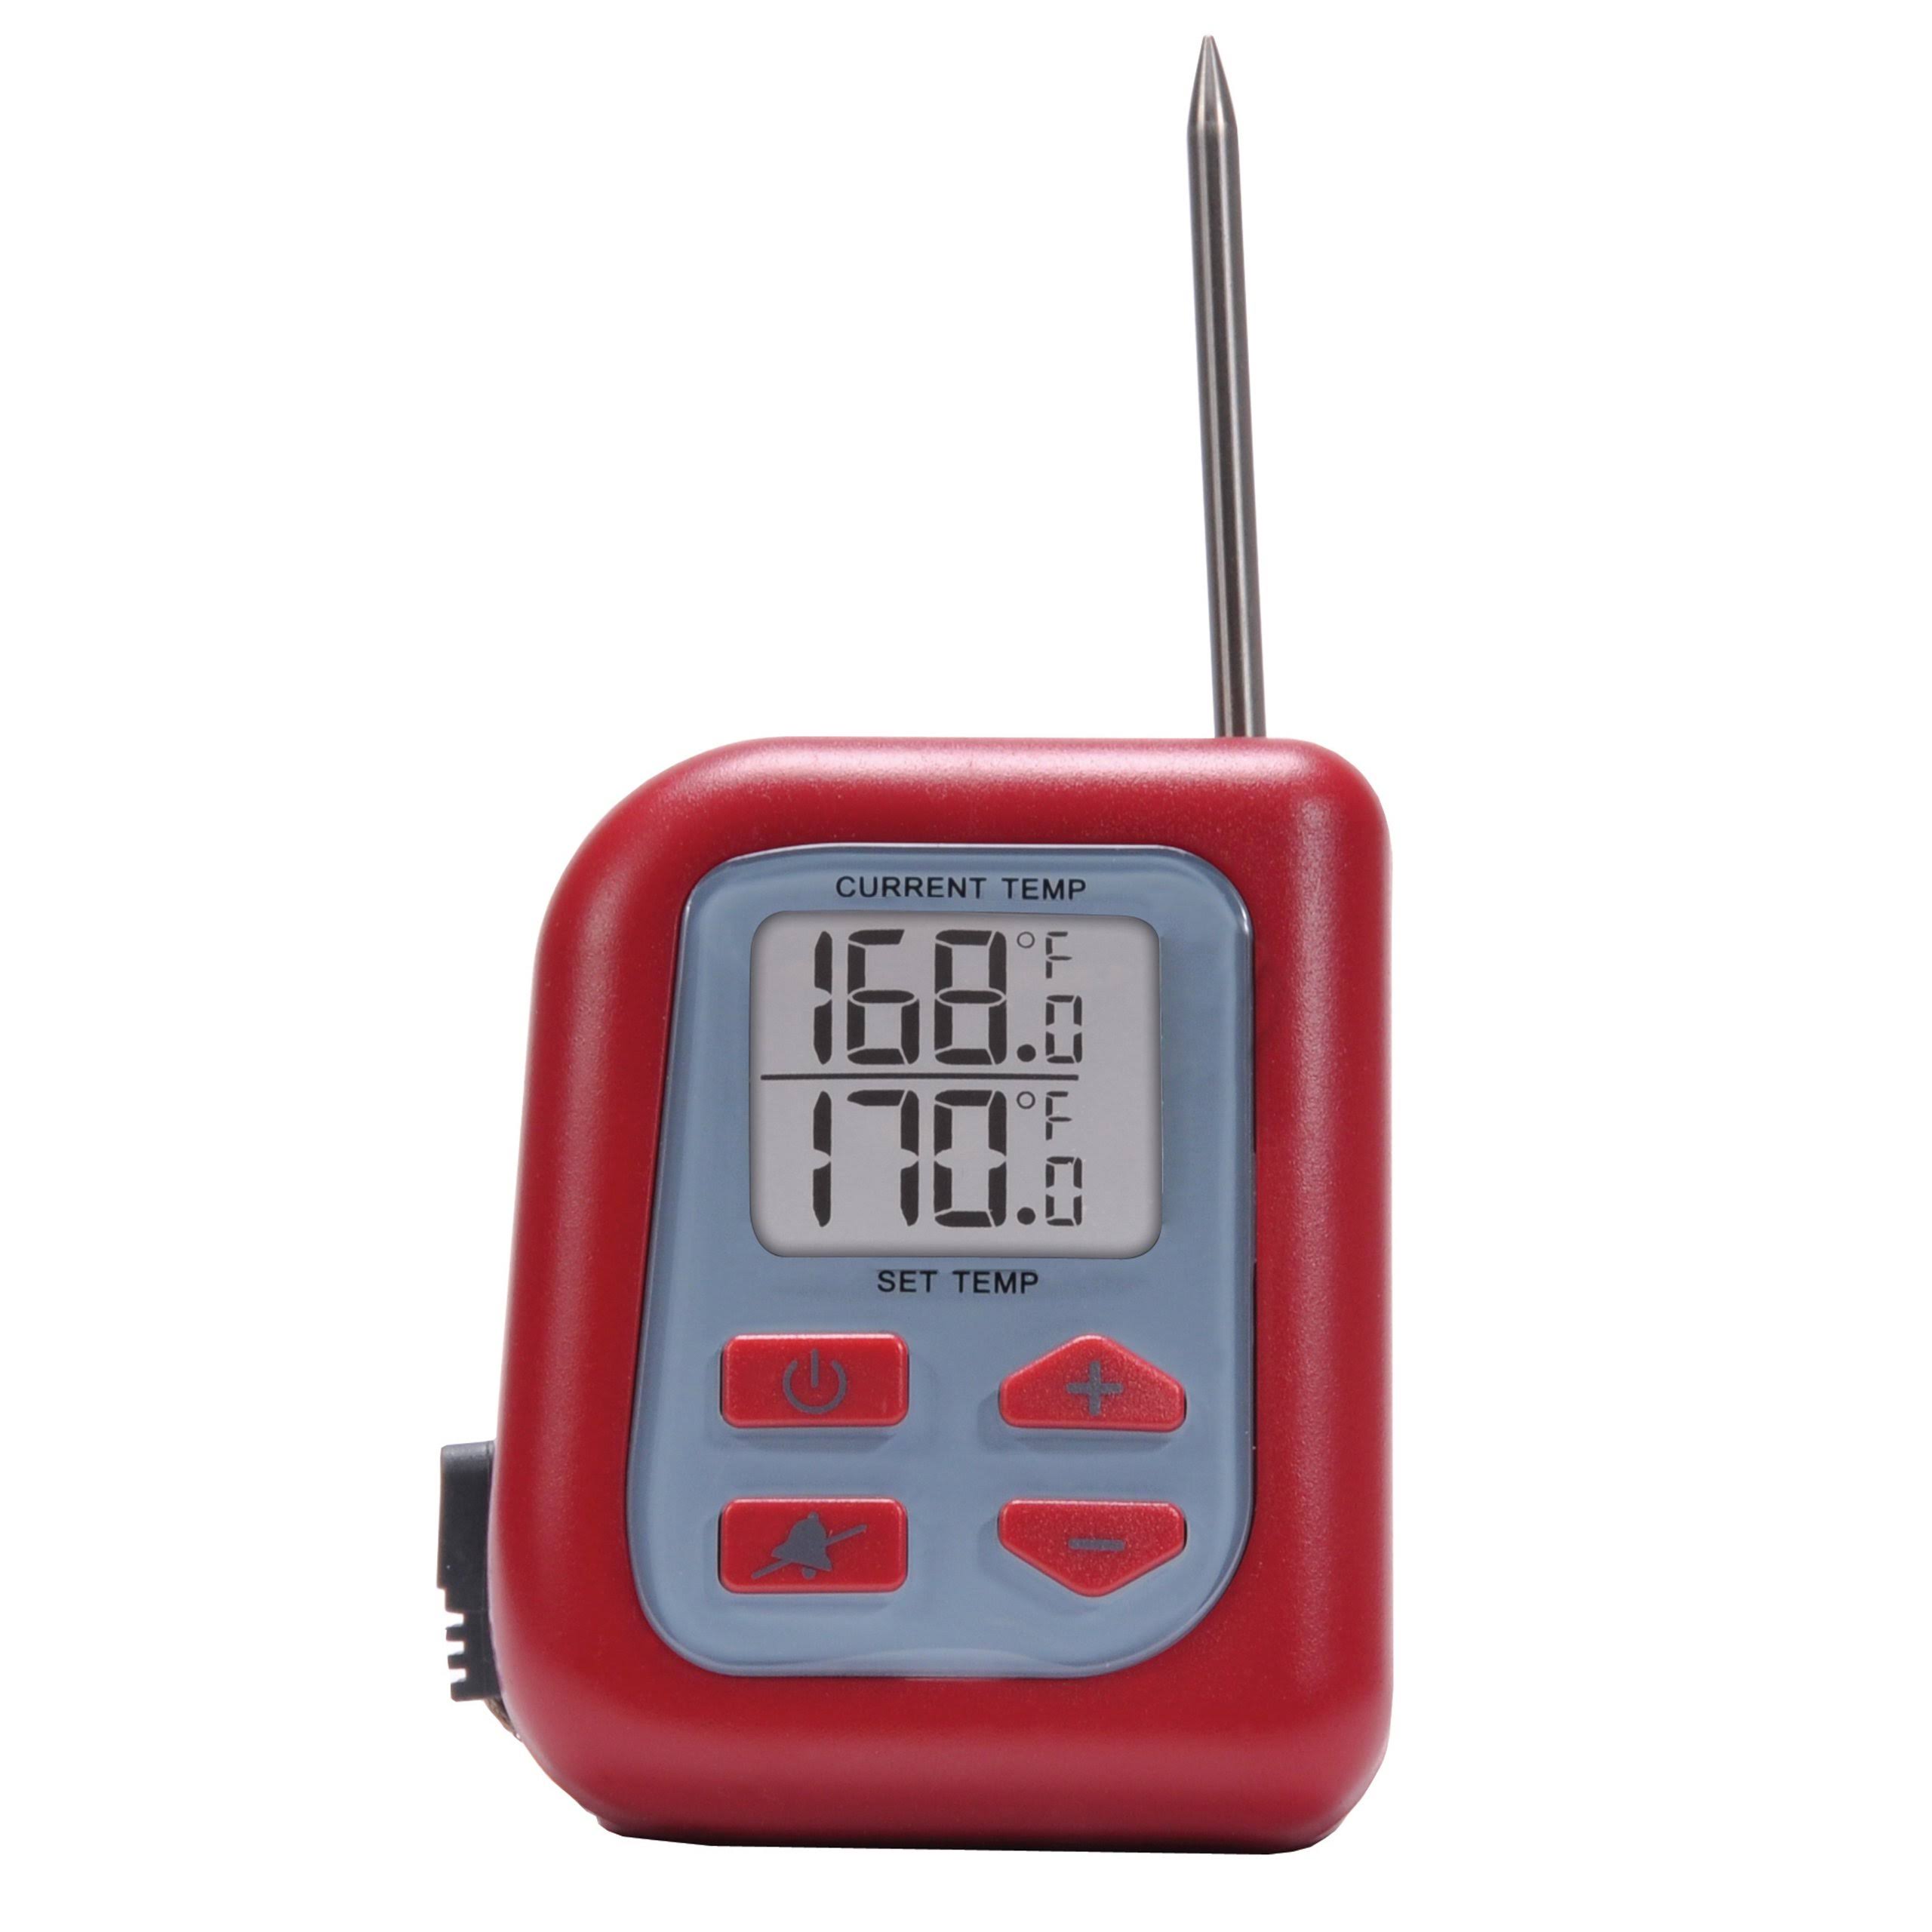 AcuRite 00993st Digital Cooking Thermometer - with Probe